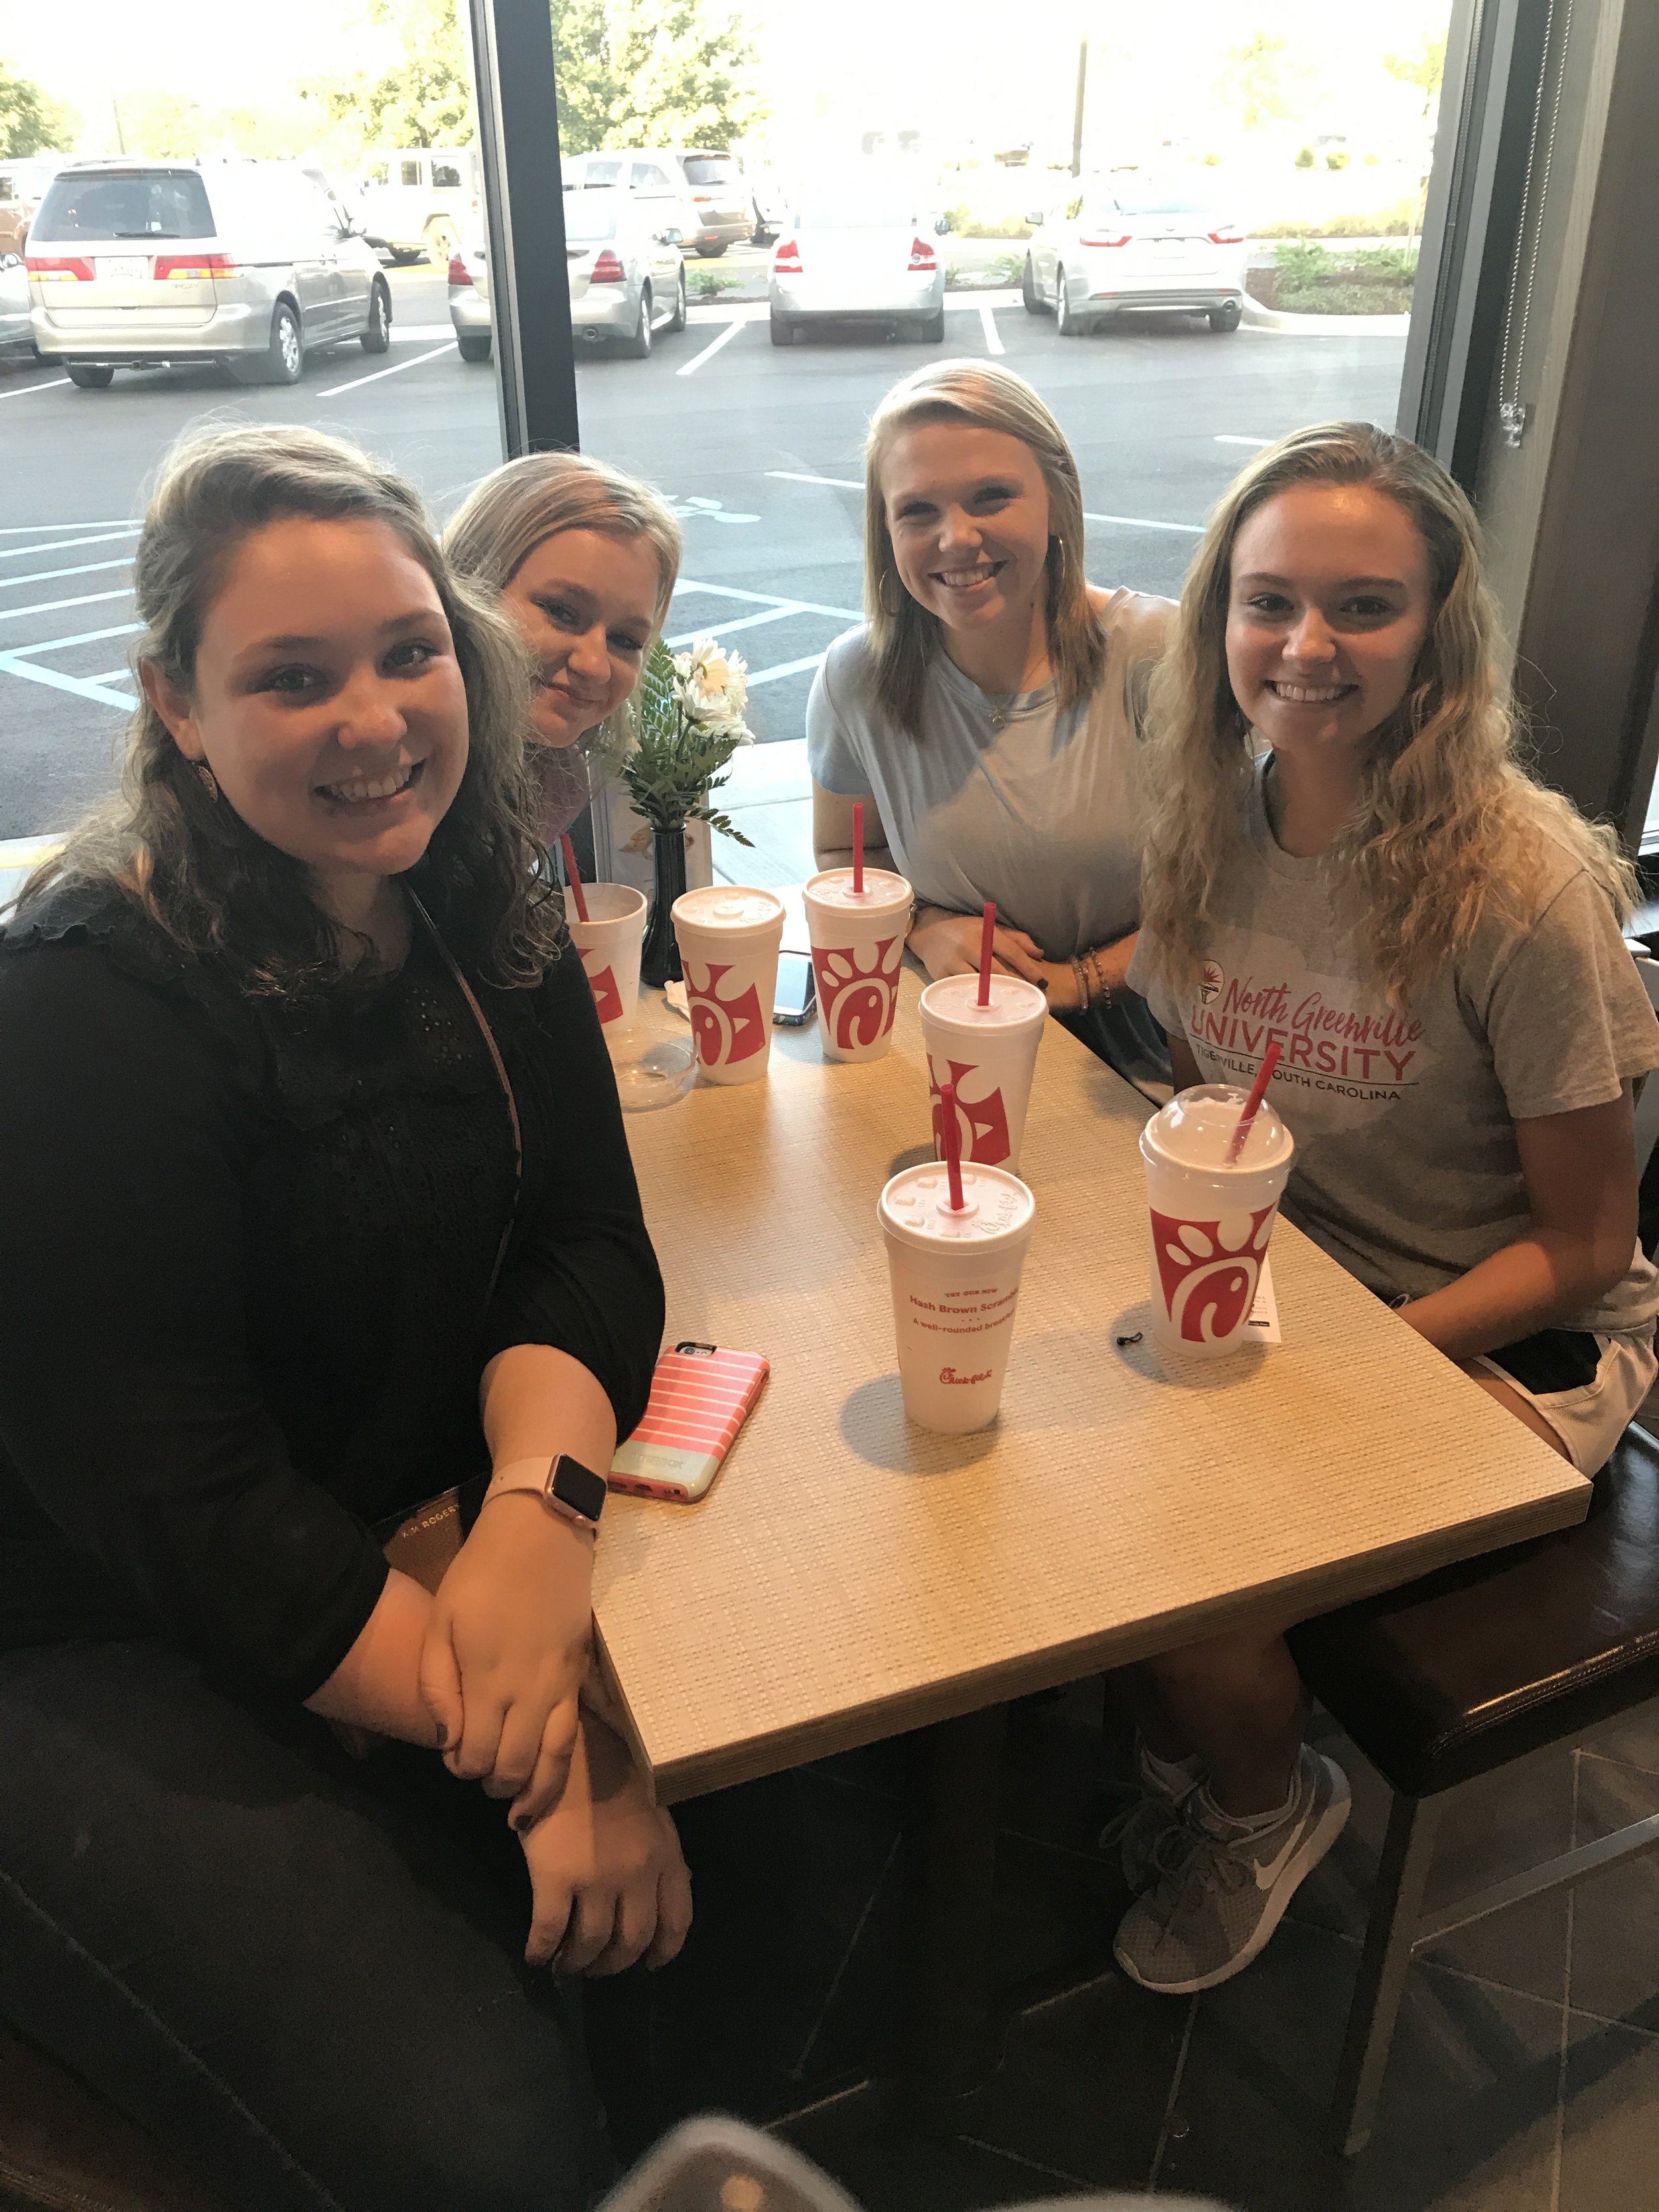 Hannah Chapman (freshman), Kelsey Truouck (freshman), Mary Collins (freshman) and Amy Dover (freshman) enjoying Chick-fil-A's grand opening in Travelers Rest, S.C.